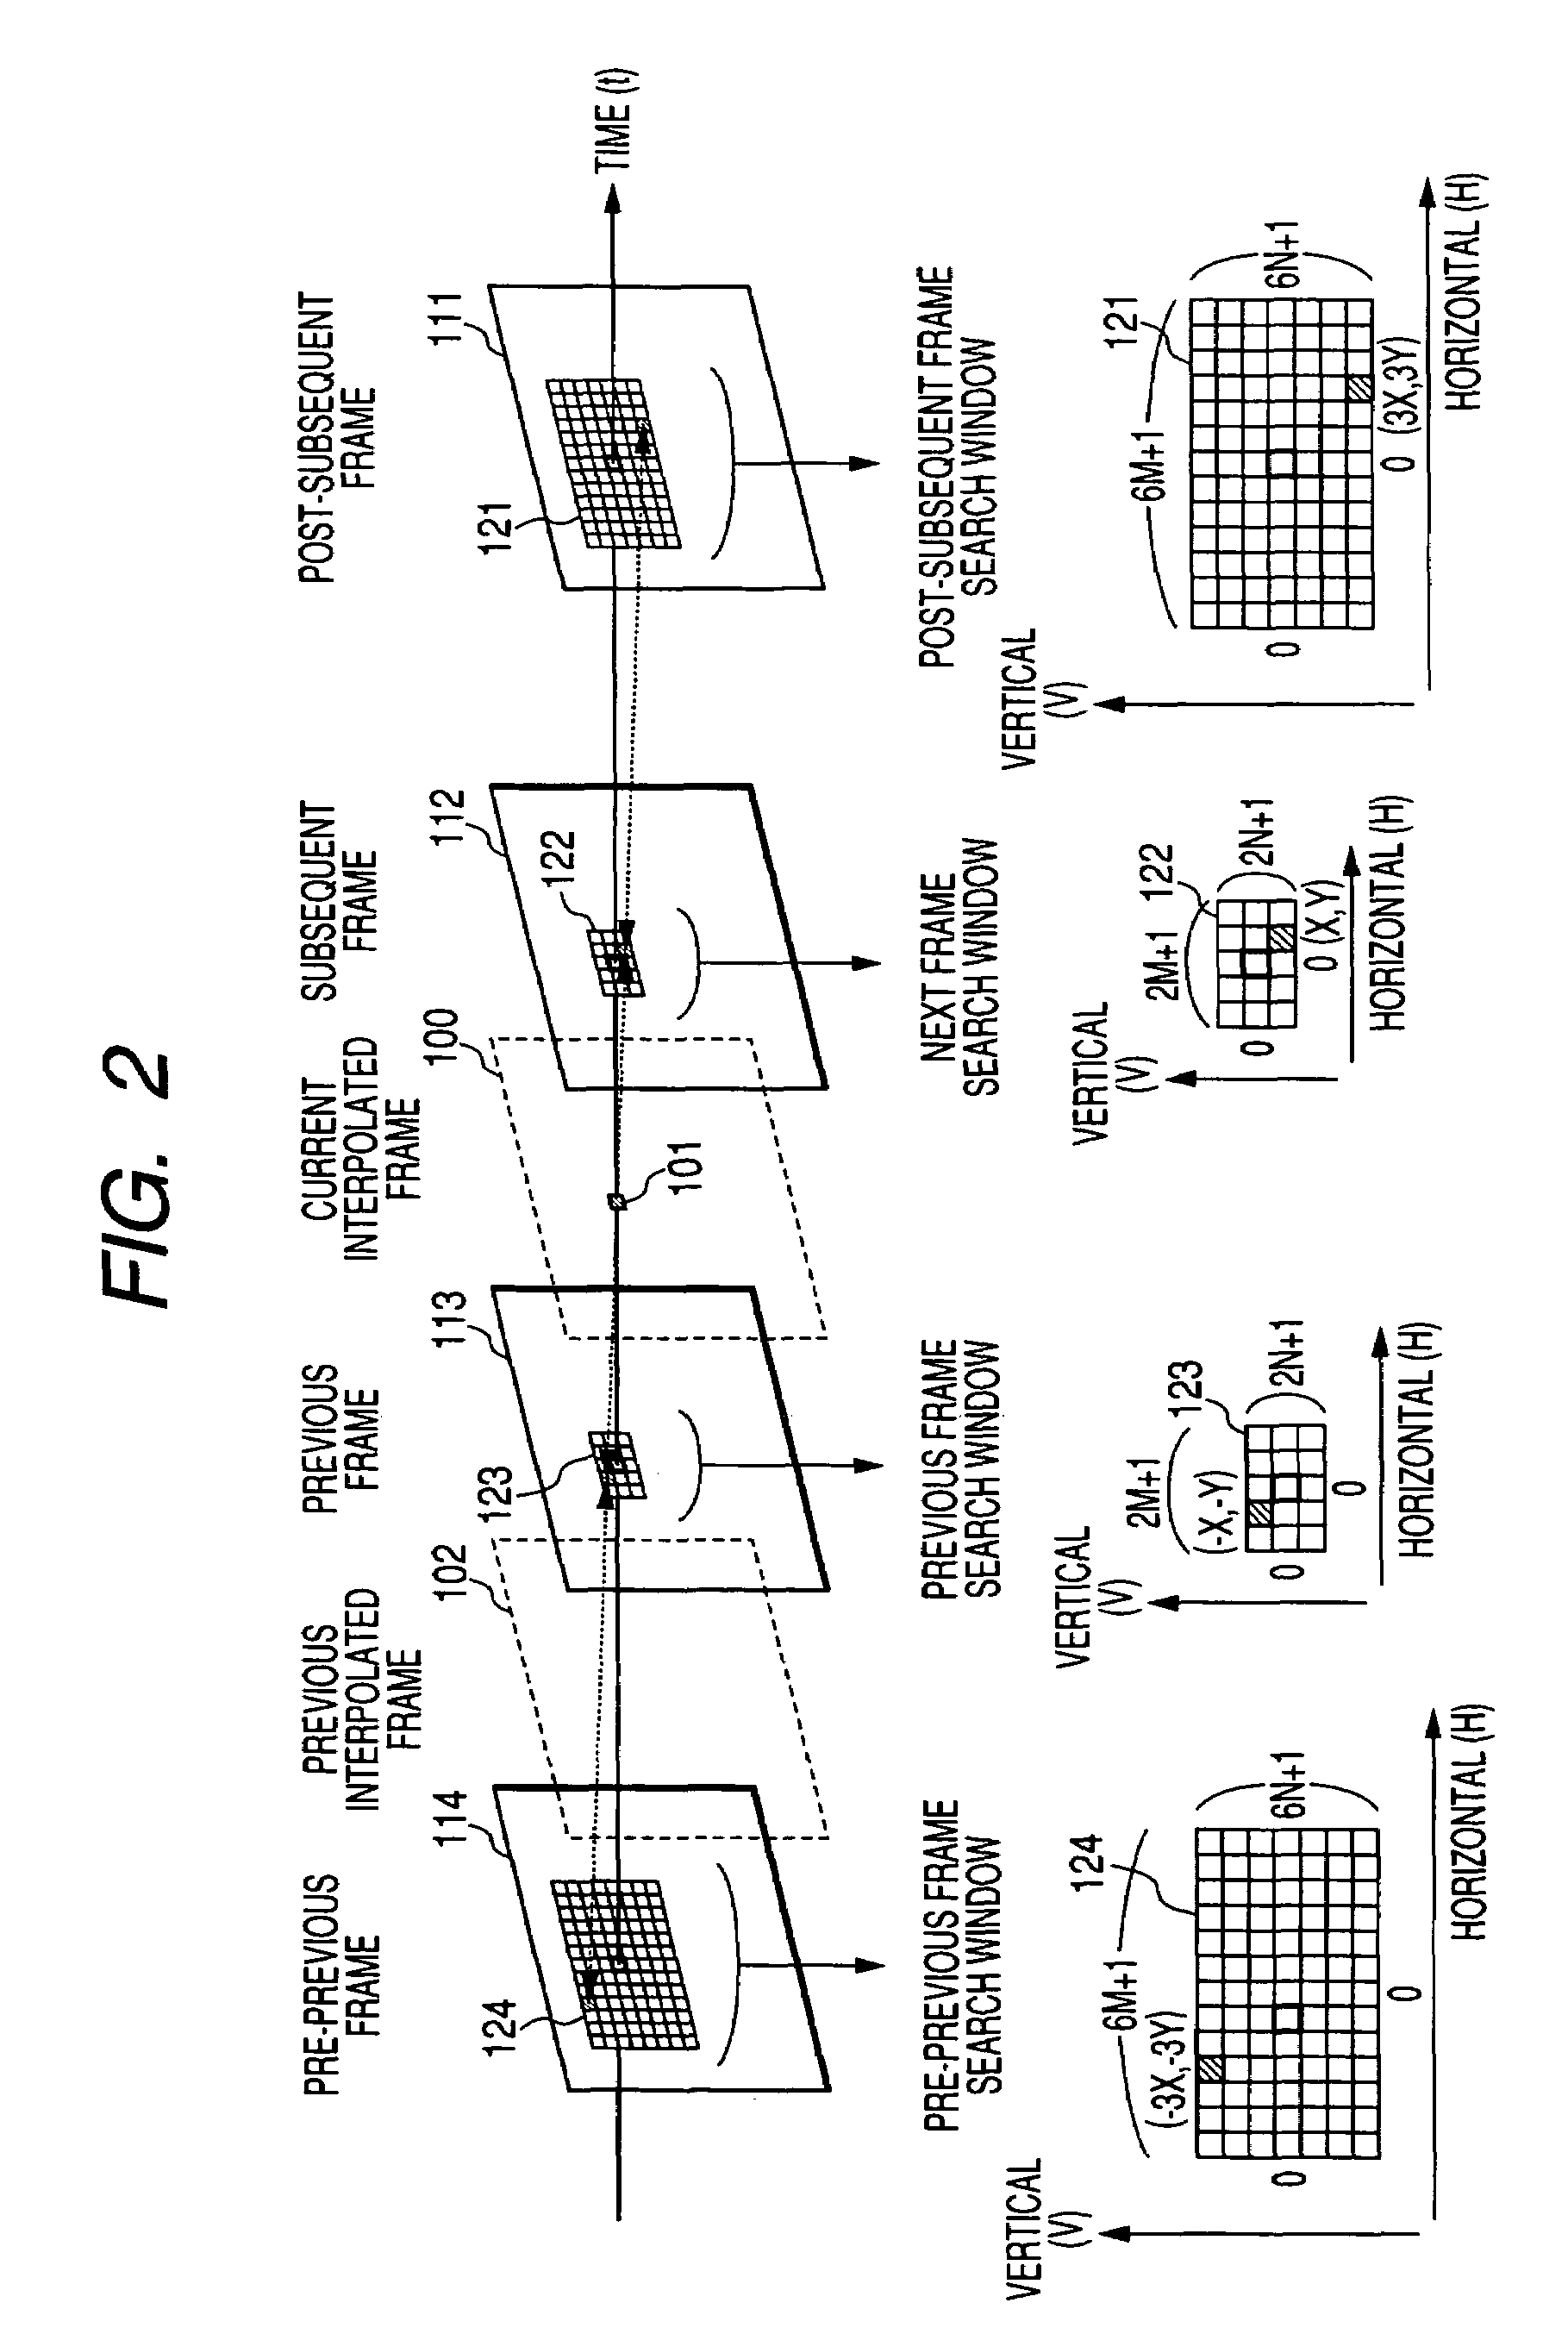 Frame rate conversion device, image display apparatus, and method of converting frame rate